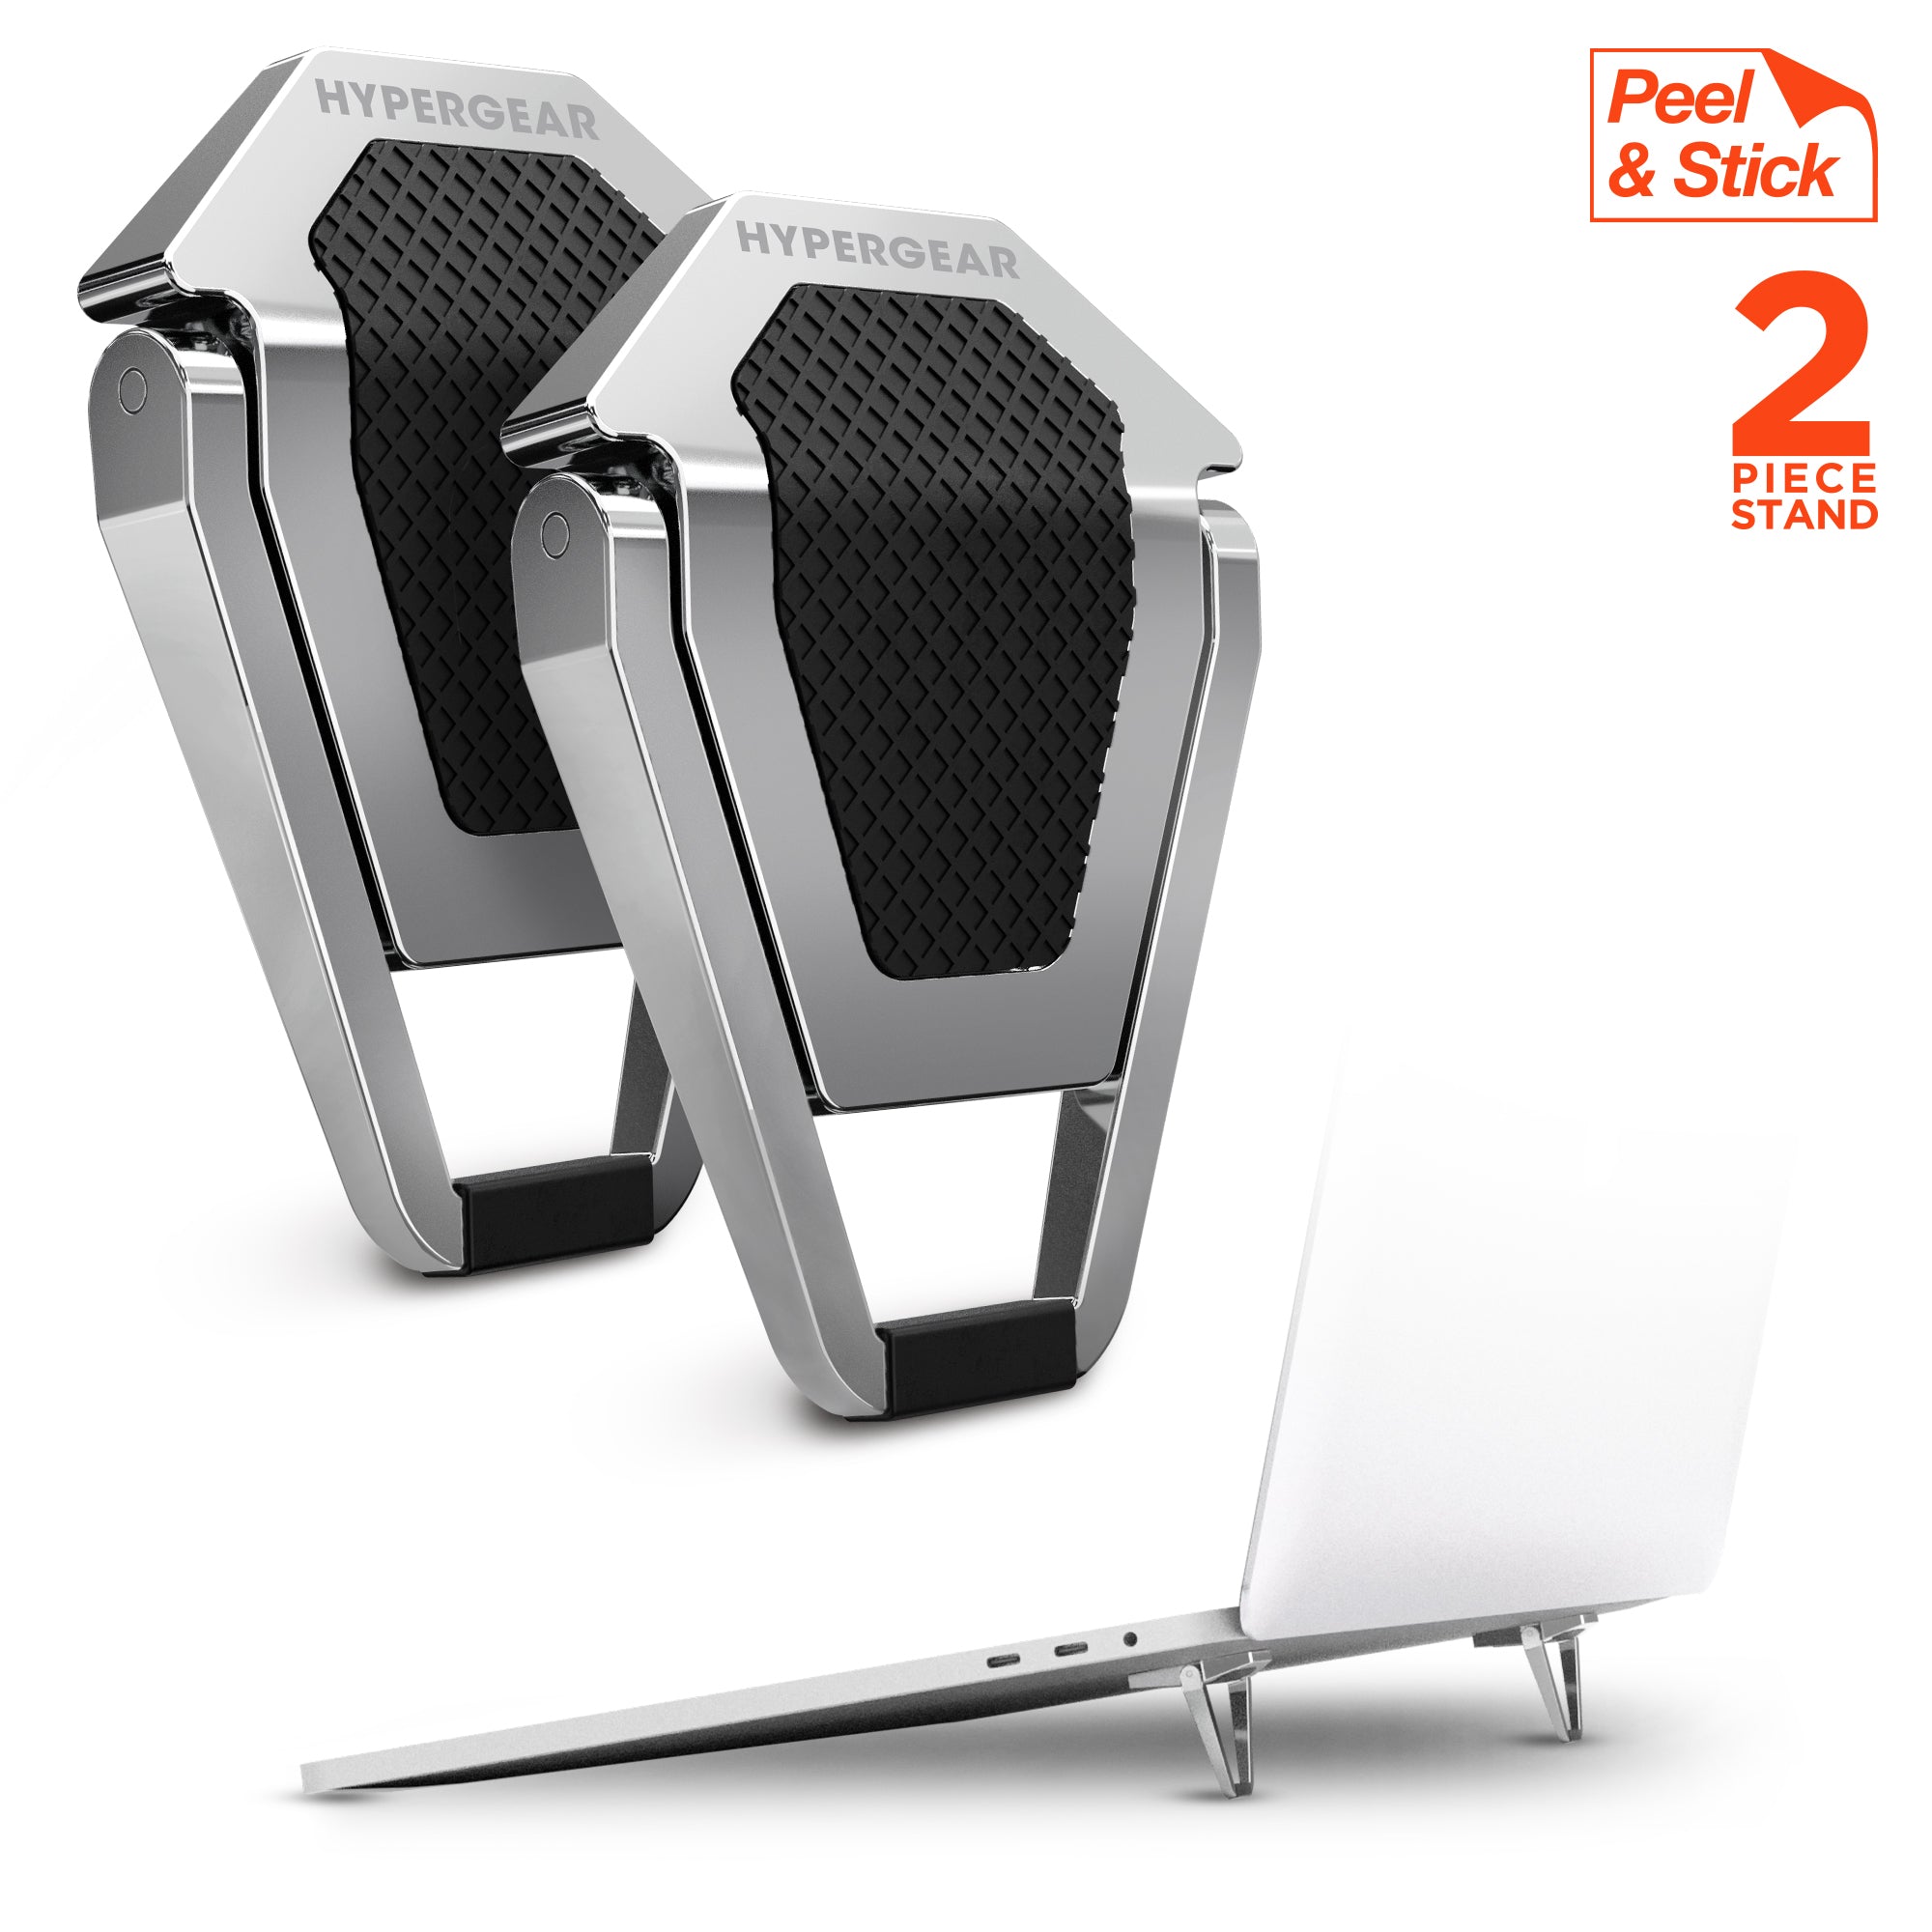 Mini Foldable Laptop Stand, Portable Laptop Stand